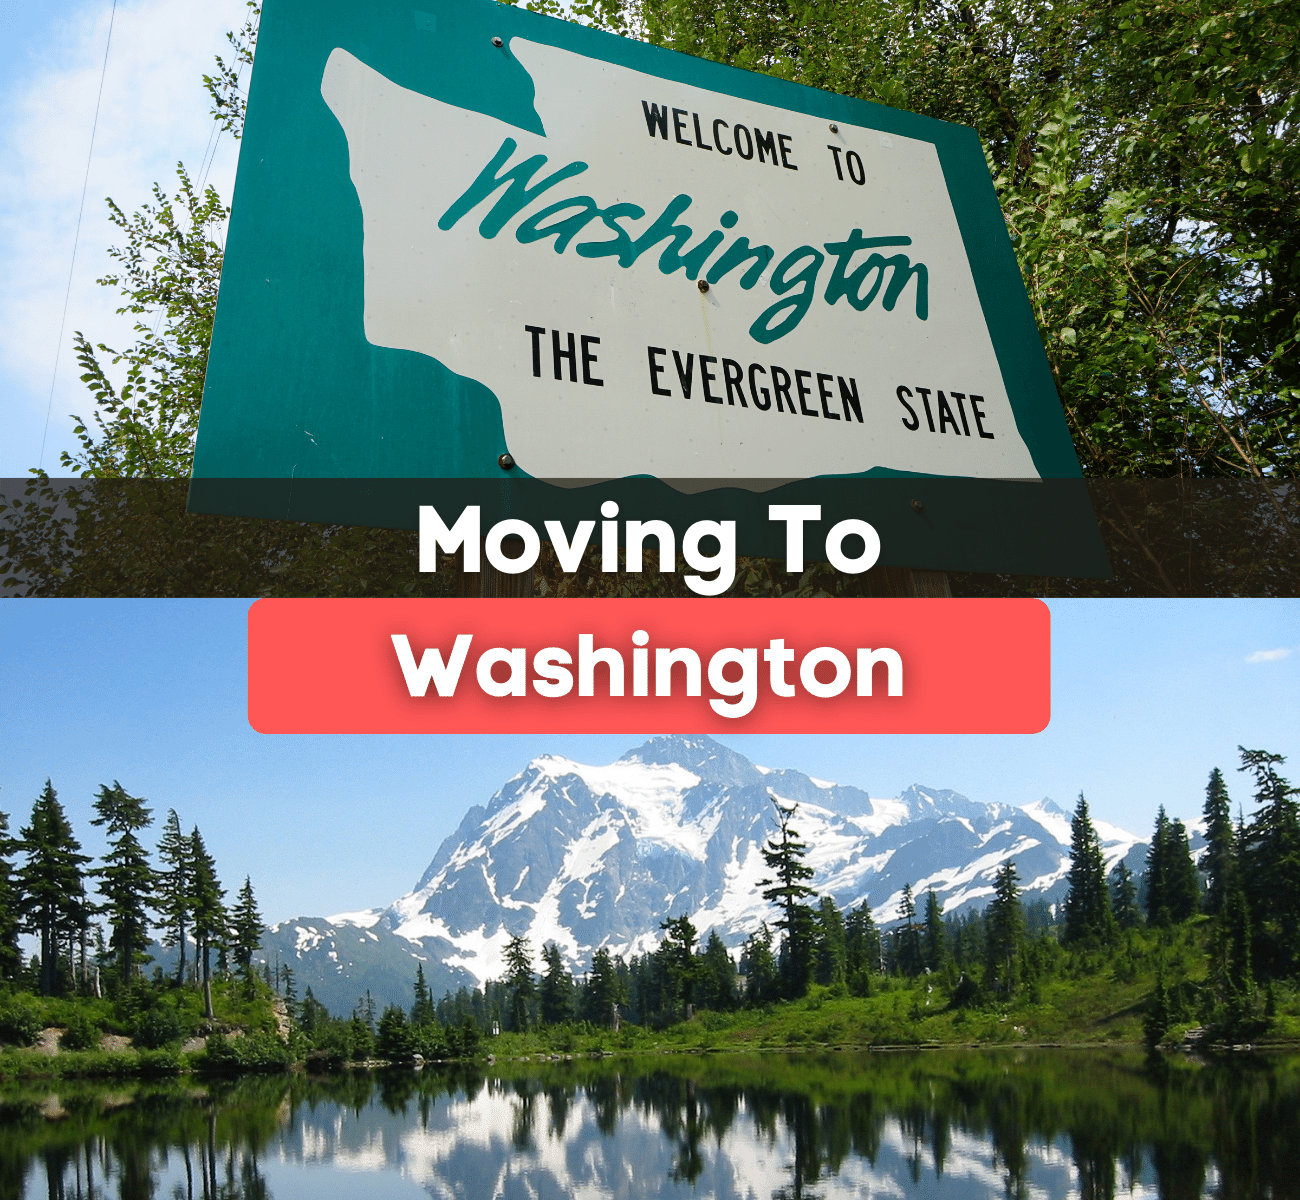 Welcome to Washington sign and Mount Rainer in Washington State 